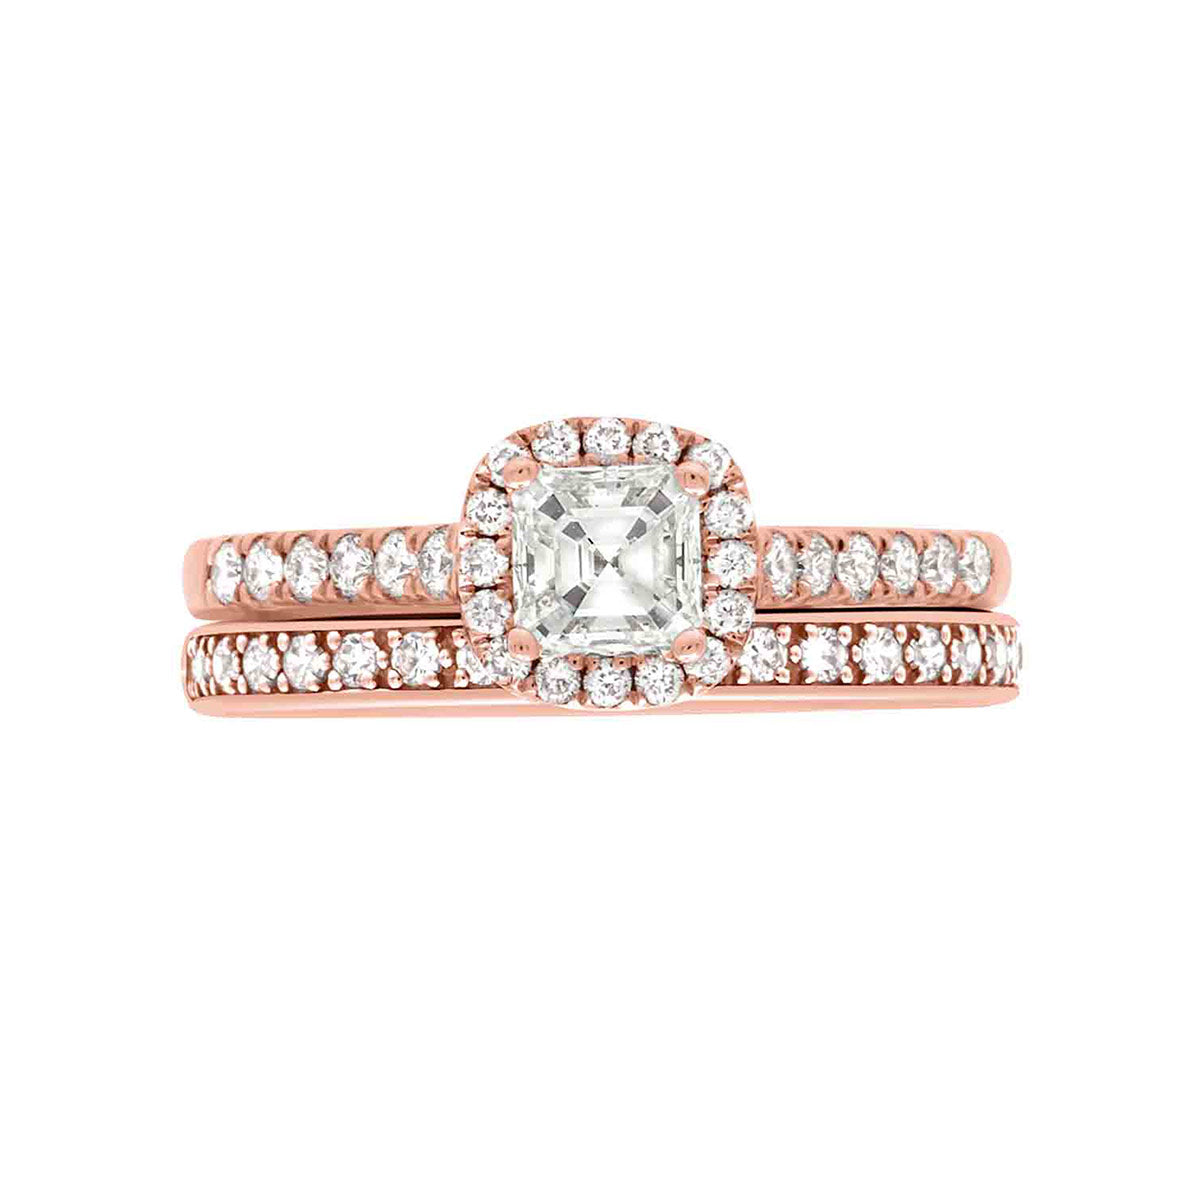 Asscher Halo Diamond Ring in rose gold with a matching rose gold and diamond wedding band